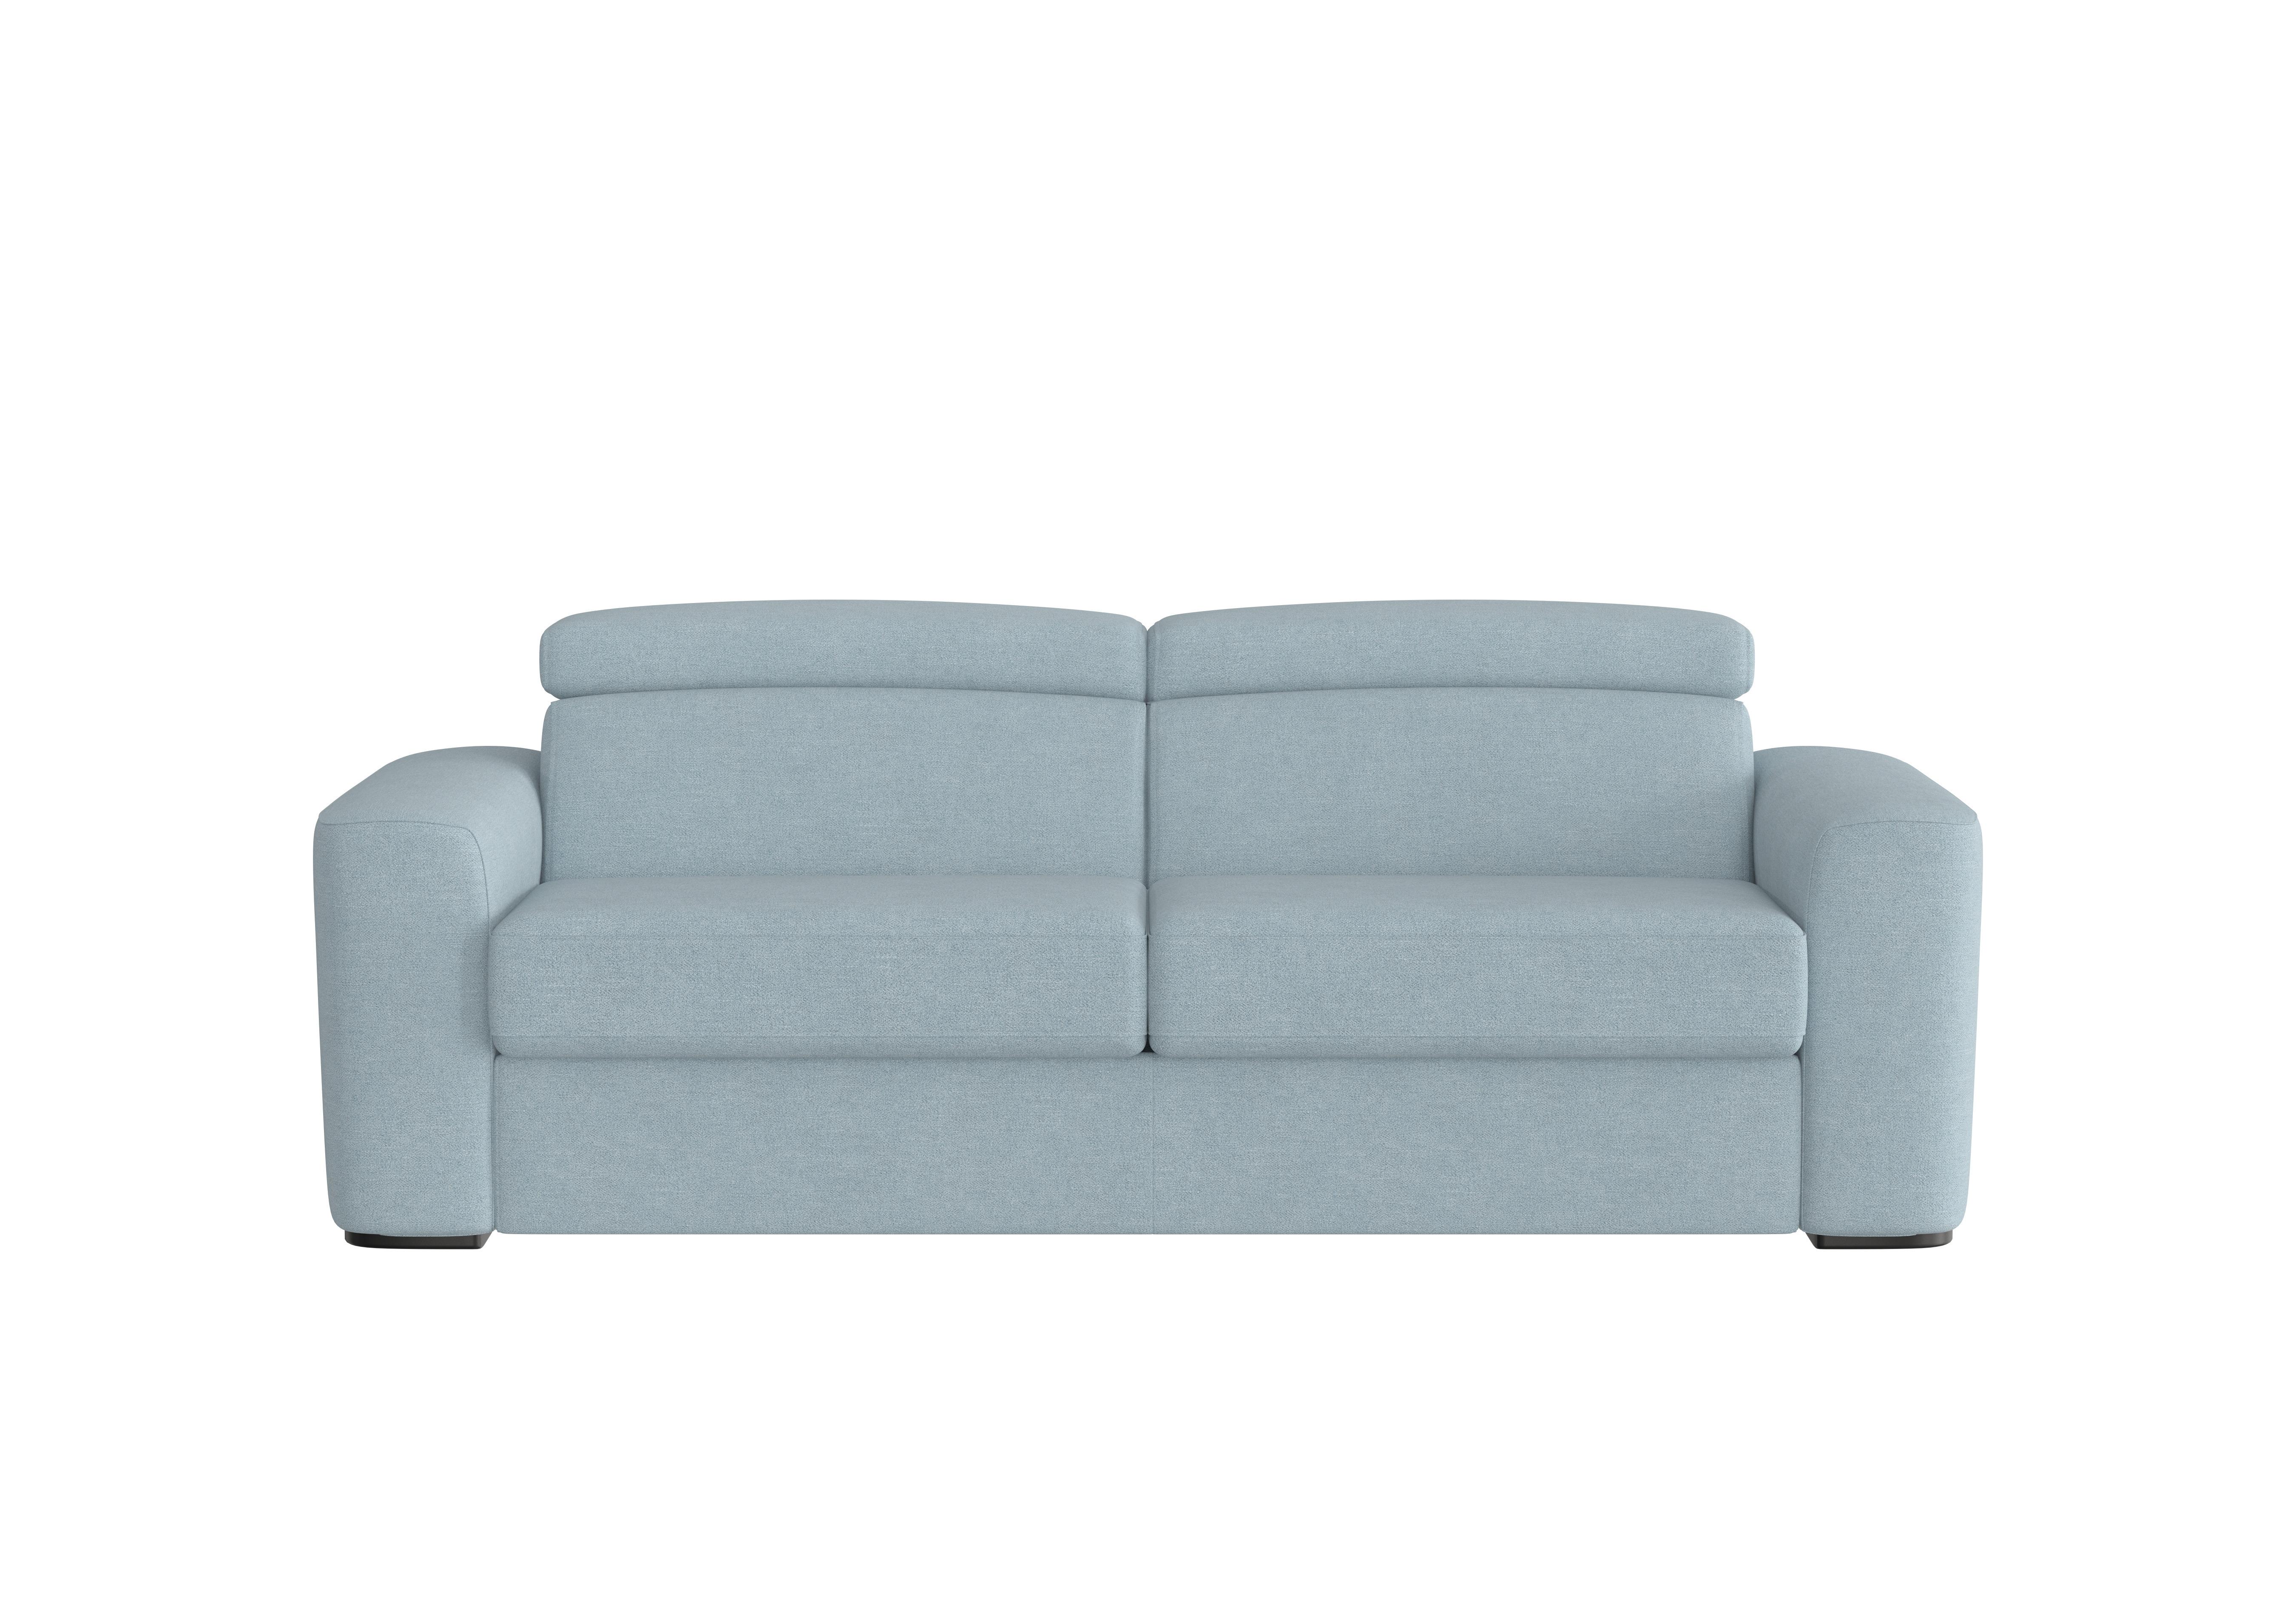 Infinity 3 Seater Fabric Sofa Bed in Fab-Meo-R17 Baby Blue on Furniture Village